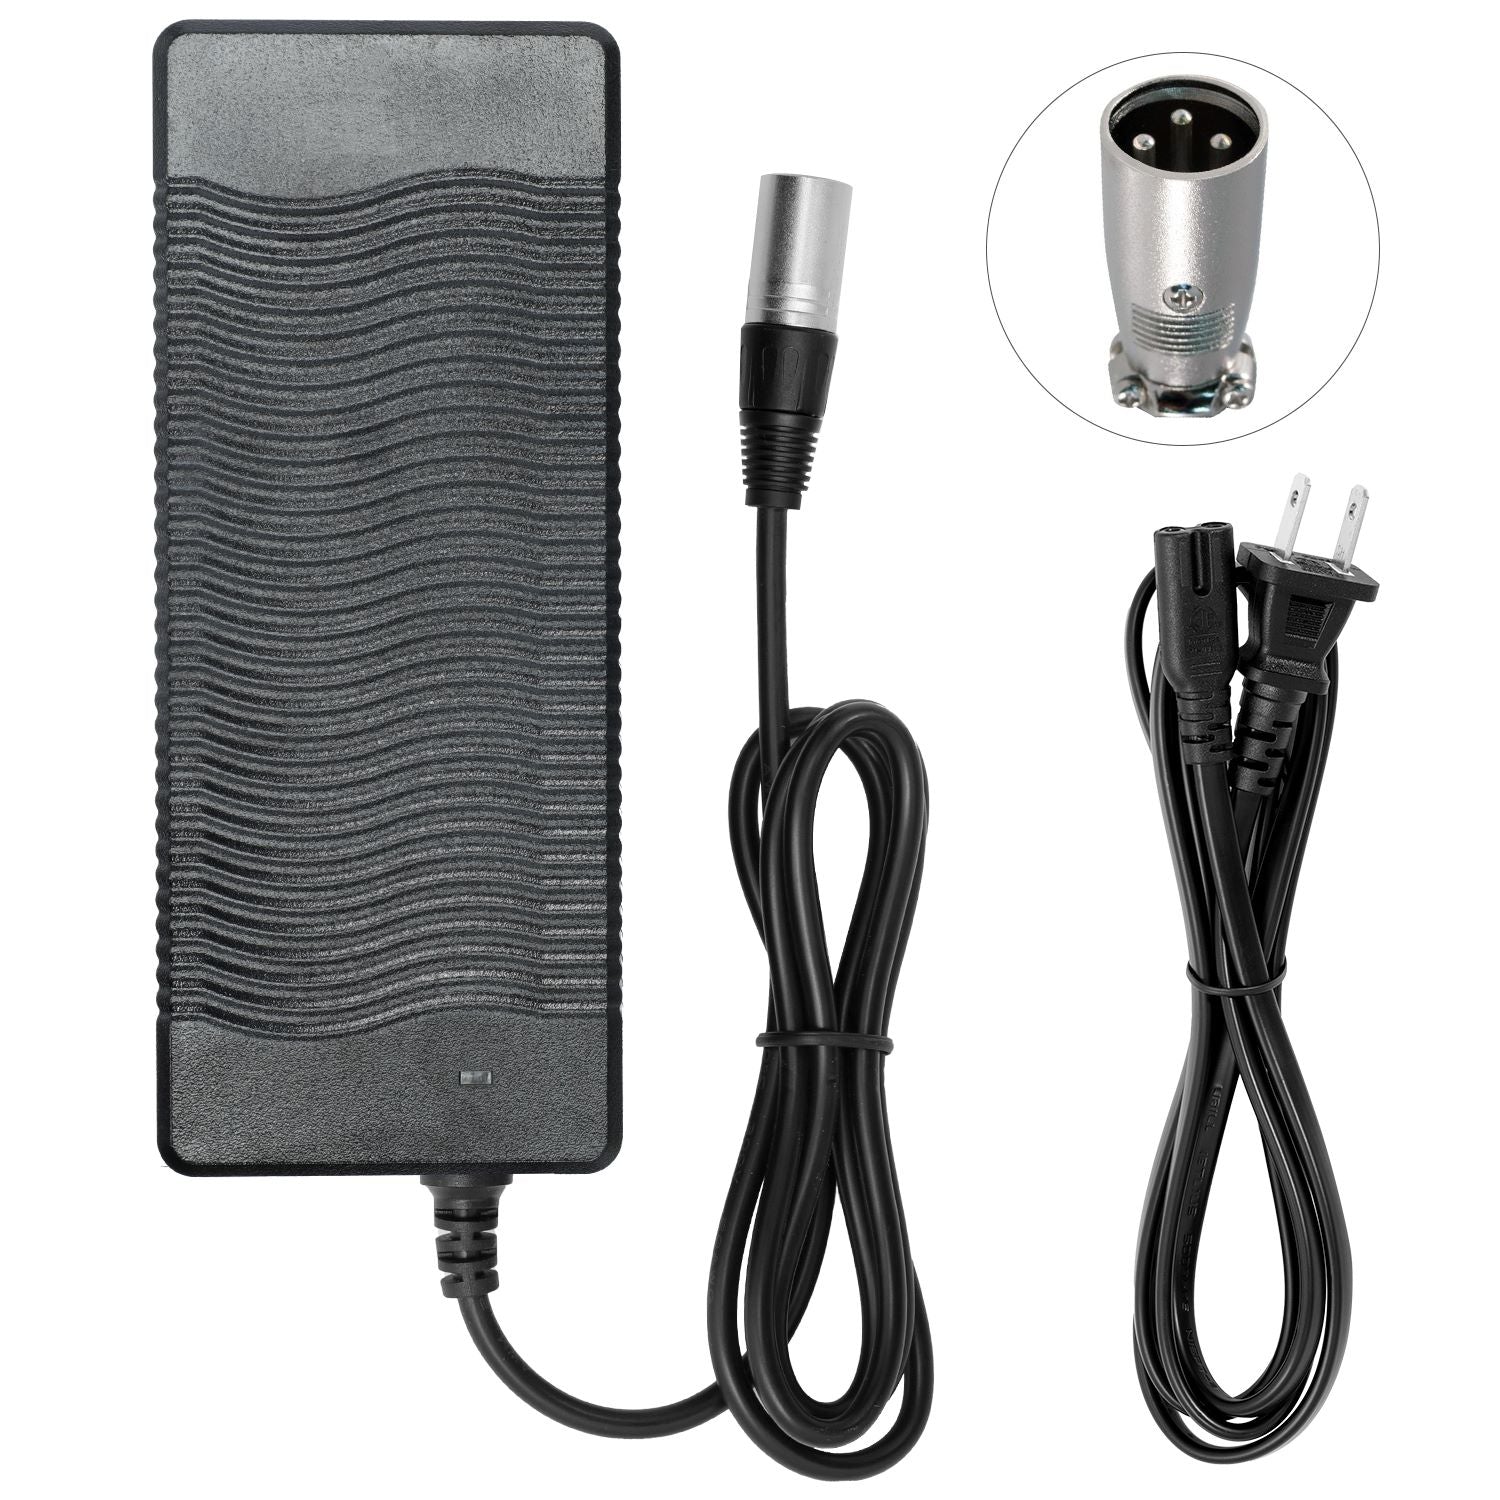 UL Listed Charger for Rad Power eBikes (For 48V Battery Models Only)